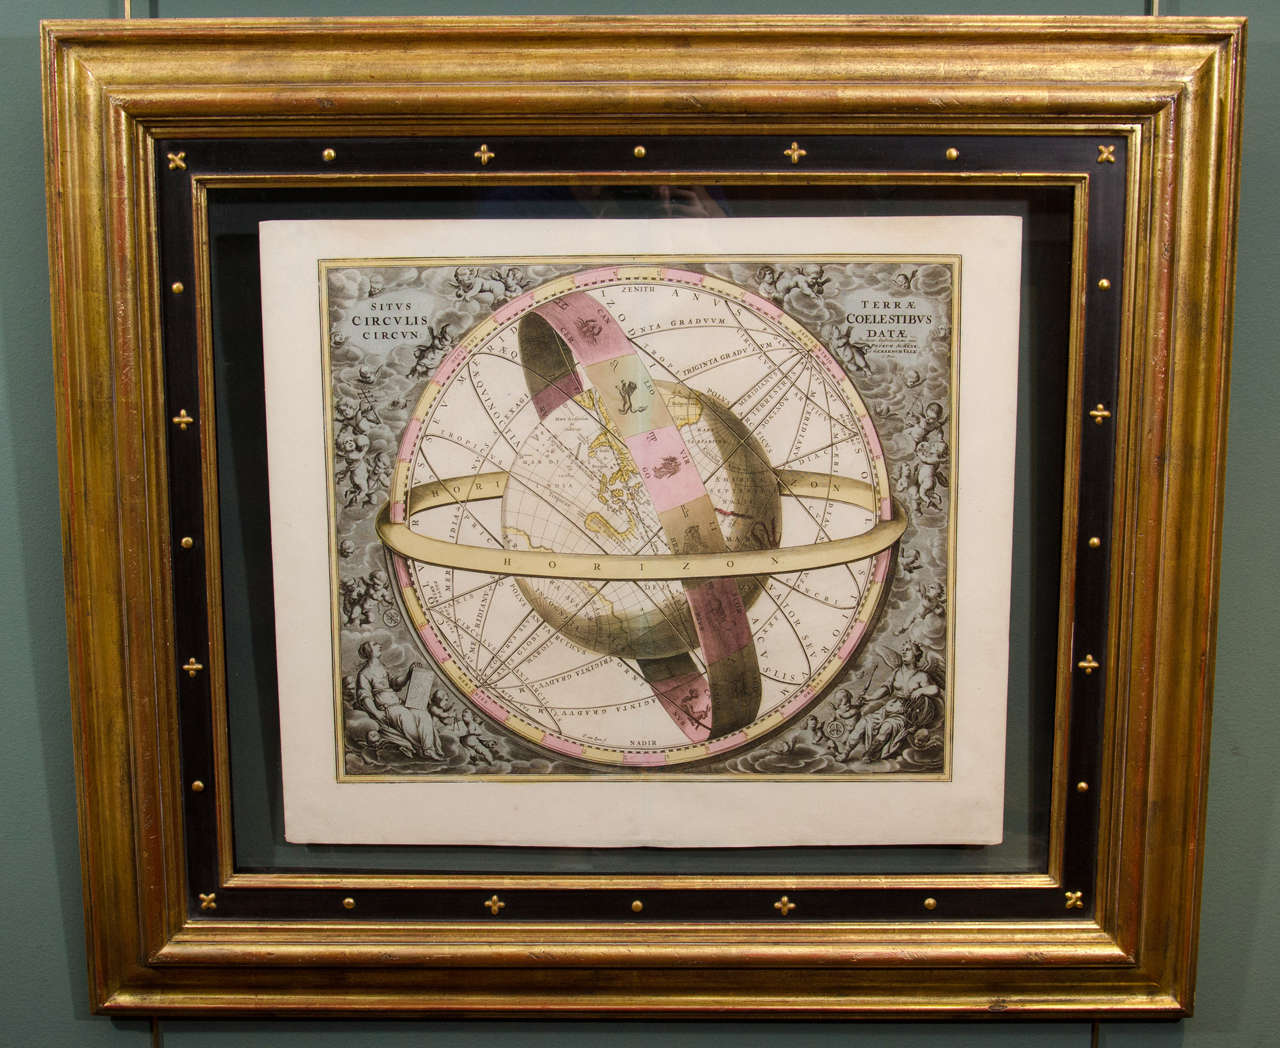 Andreas Cellarius
From Atlas Coelestis seu Harmonia Macrocosmica
Engraving with original hand color
Approximate paper size: 20”x 24”; frame size: 36 1/5” x 32”
Amsterdam, 1708.

   In addition to their lavish aesthetic appeal, the celestial